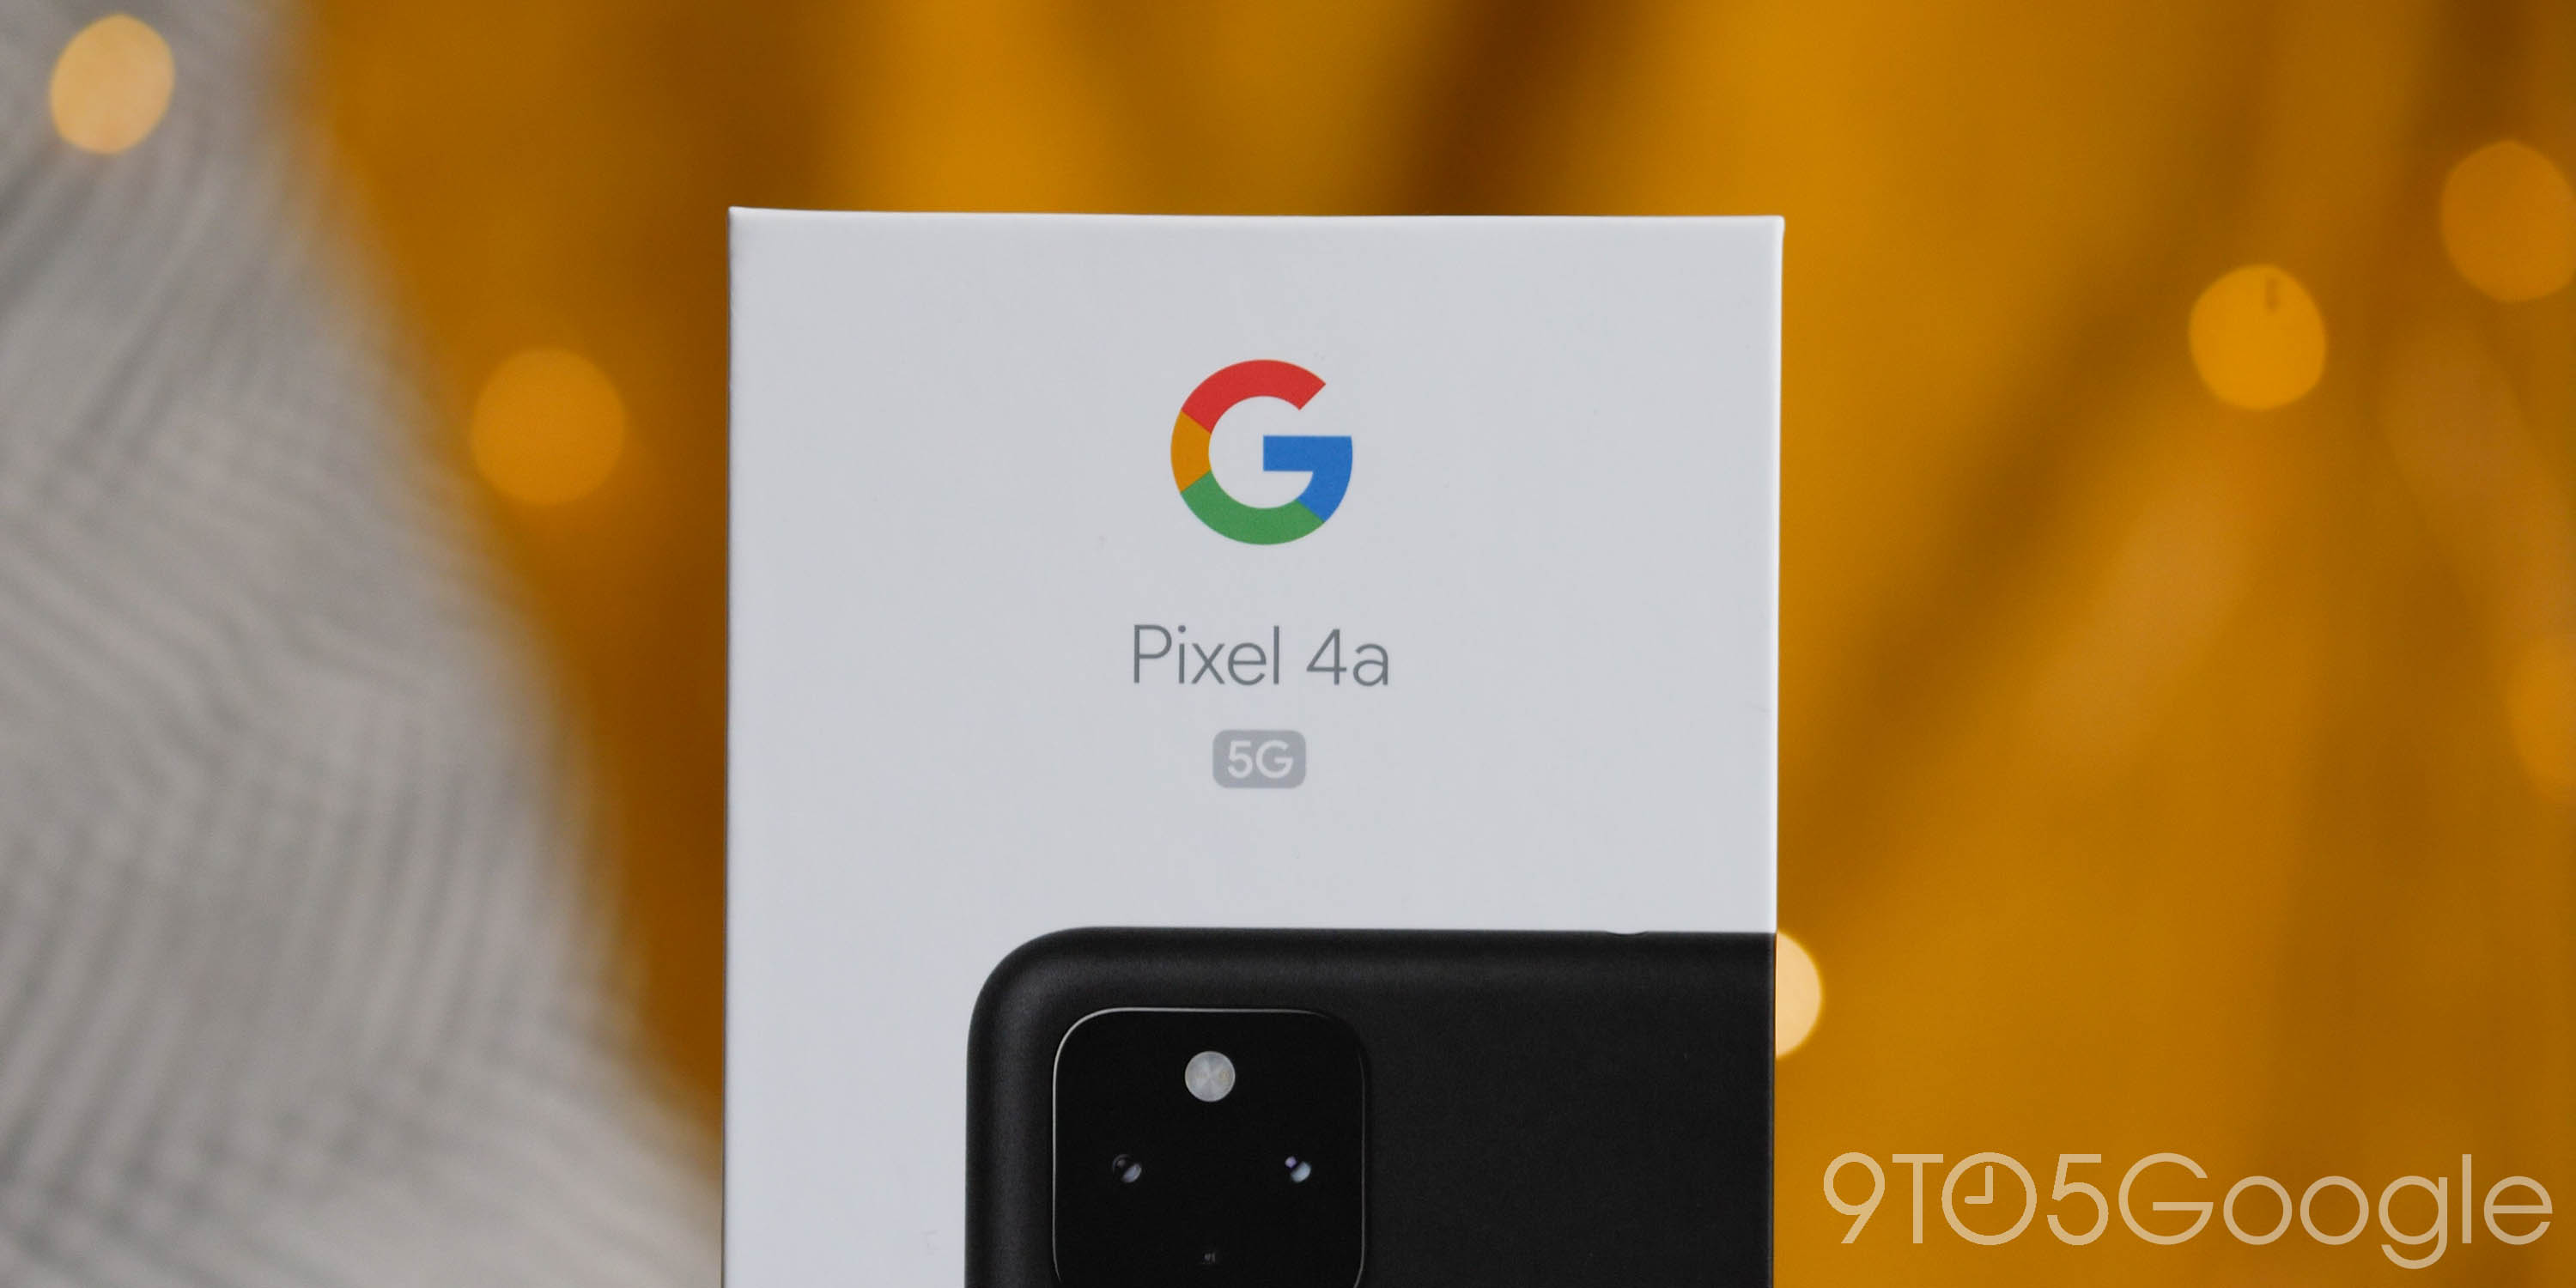 Googleâ€™s trade-in values for older Pixels skyrocket when buying the Pixel 4a 5G - 9to5Google